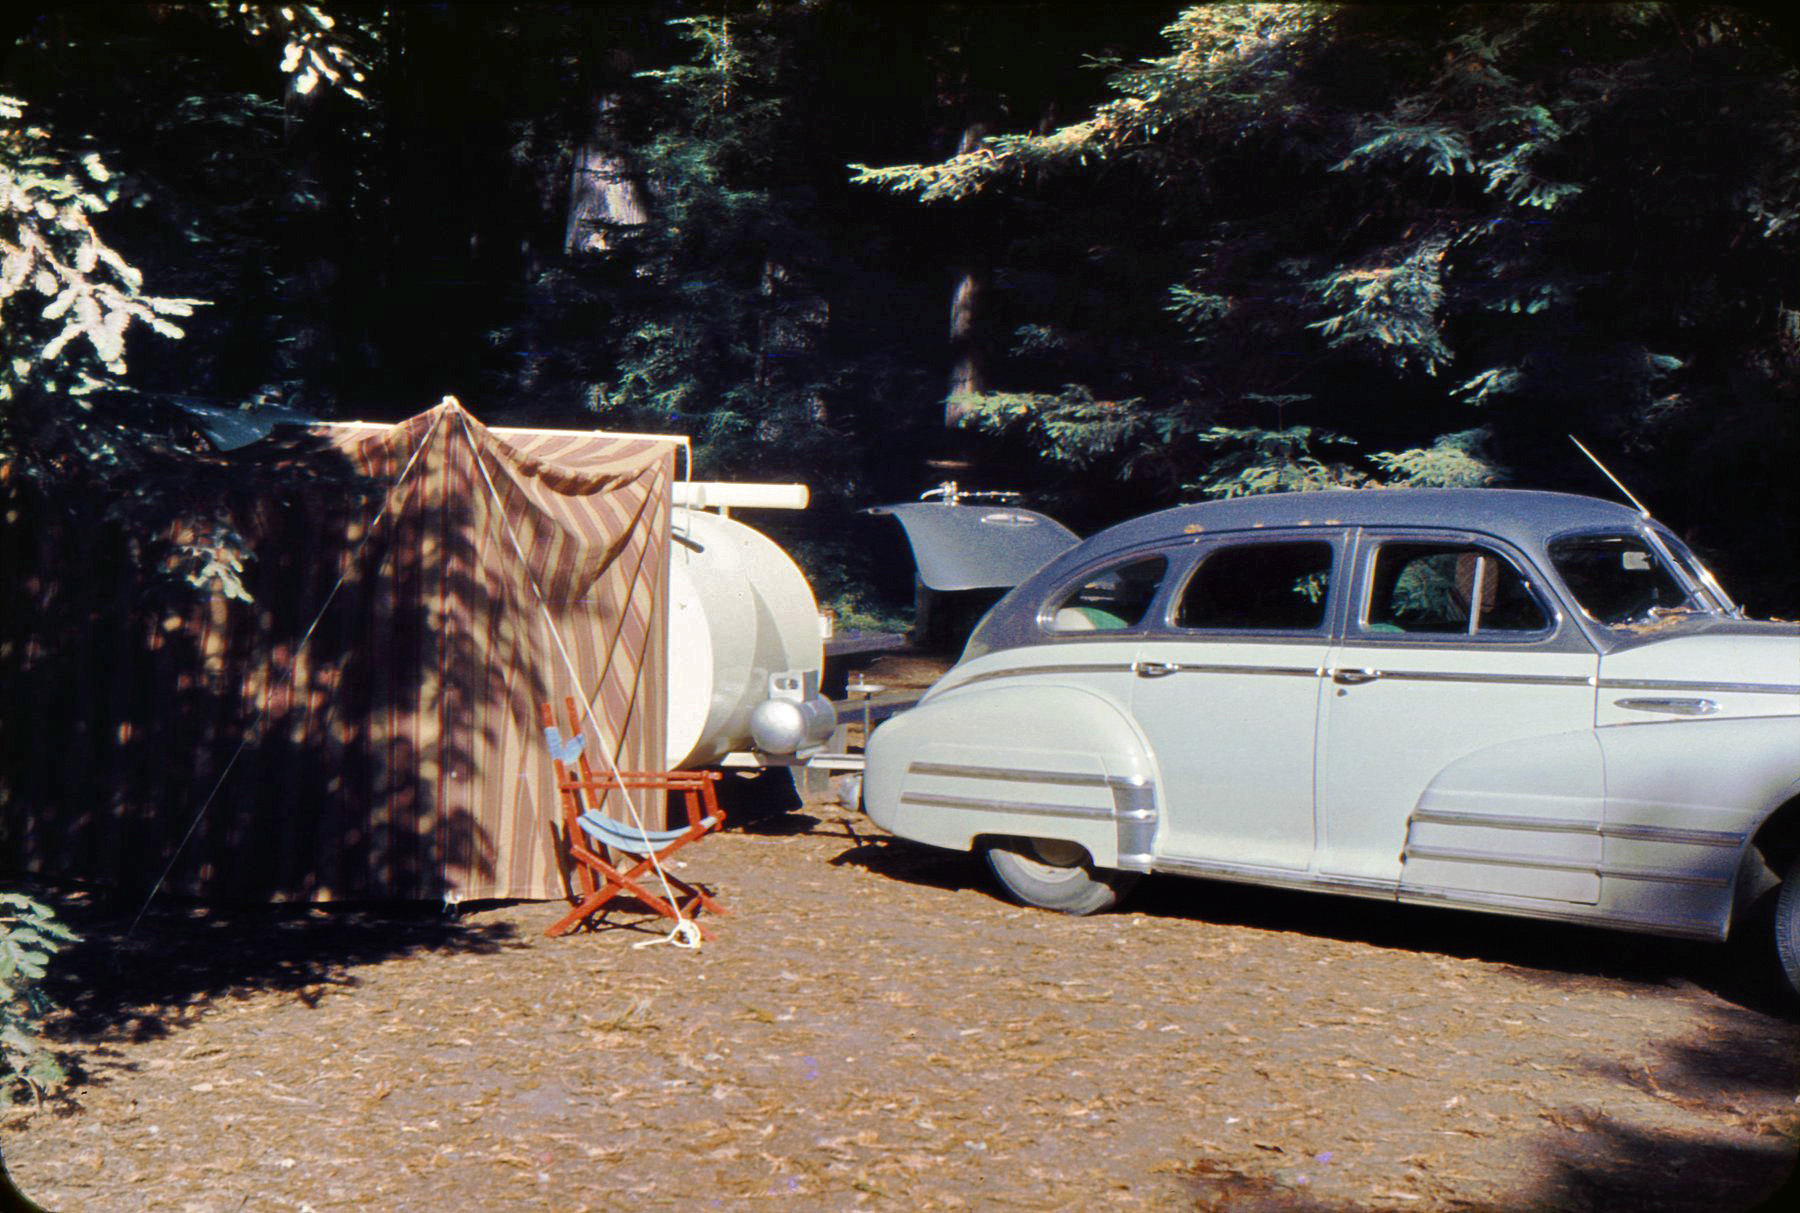 Here's the Blissmobile with the portable kitchen attached. This looks like it could be Yosemite again, in the mid-fifties. 35mm color slide. View full size.